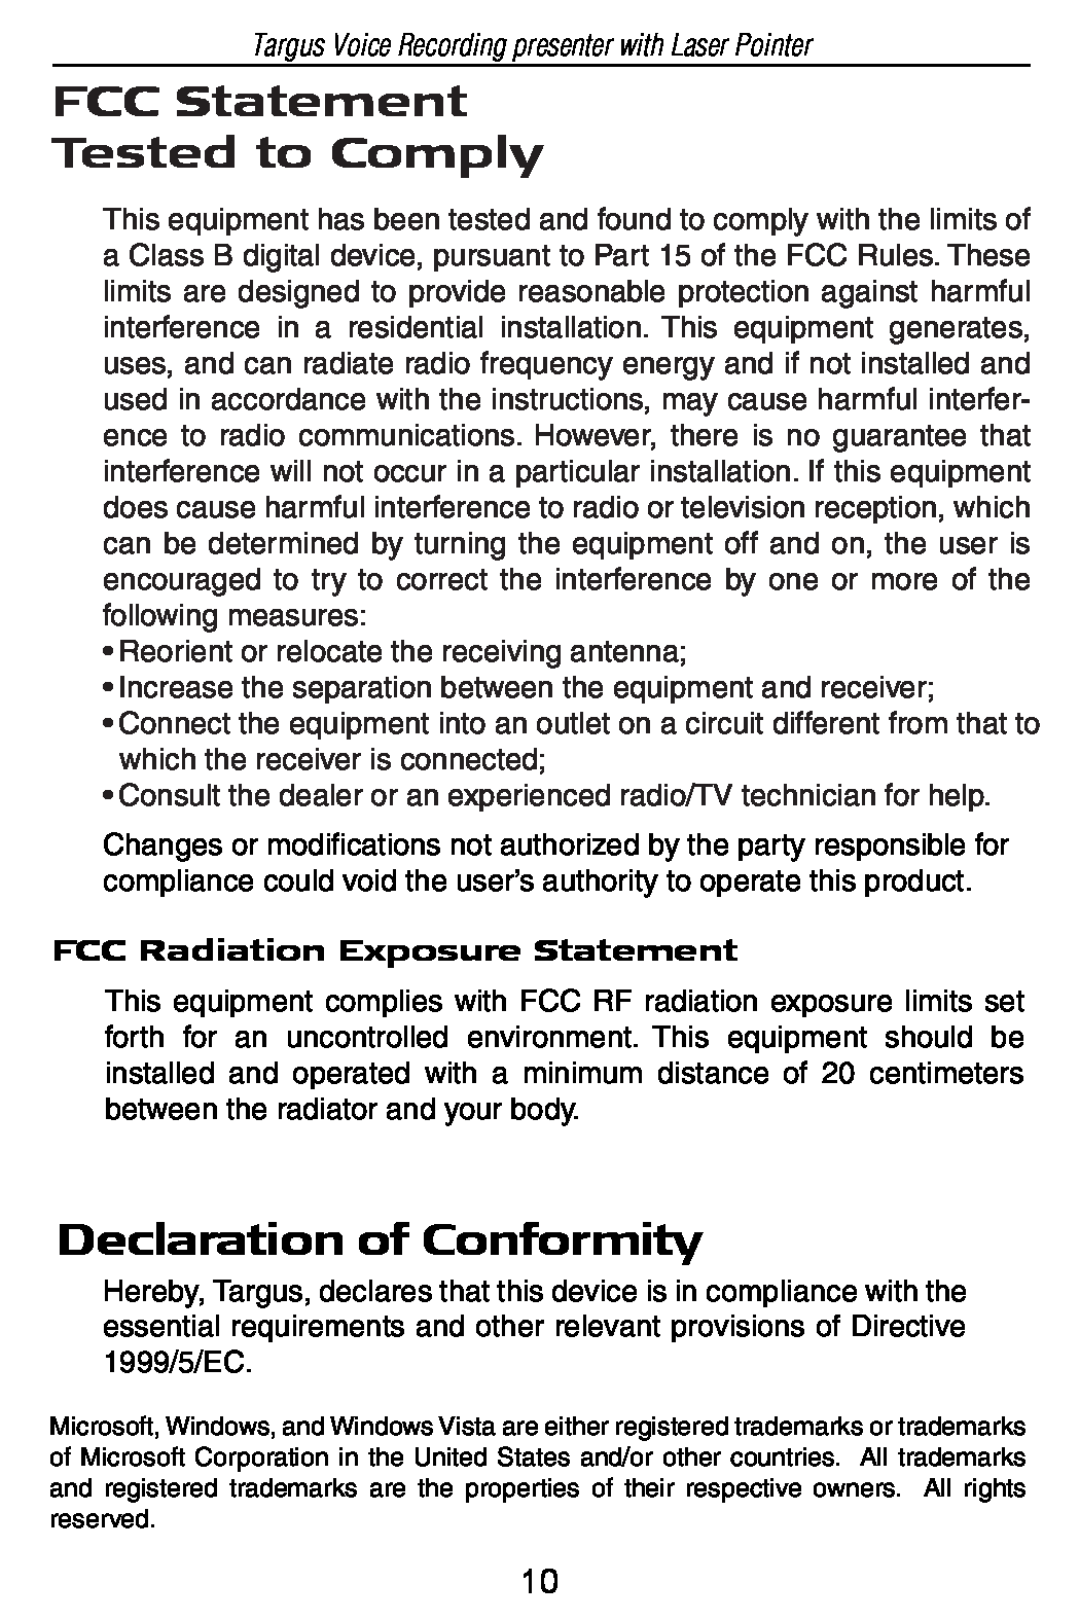 Targus AMP05US specifications Declaration of Conformity, FCC Statement Tested to Comply, FCC Radiation Exposure Statement 